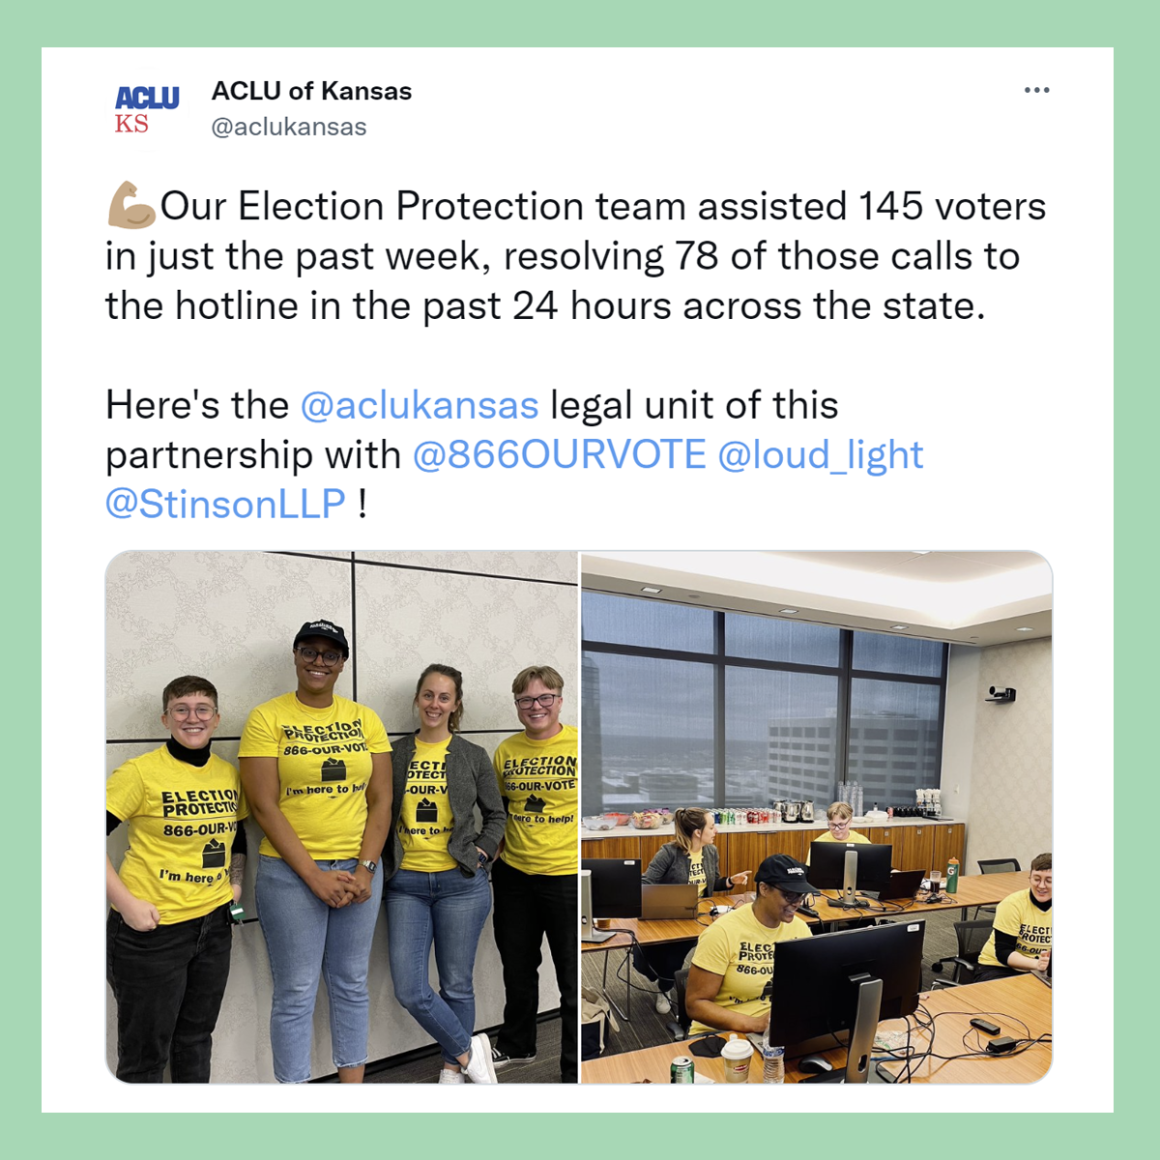 KS Election Protection team assisted 145 voters across the state